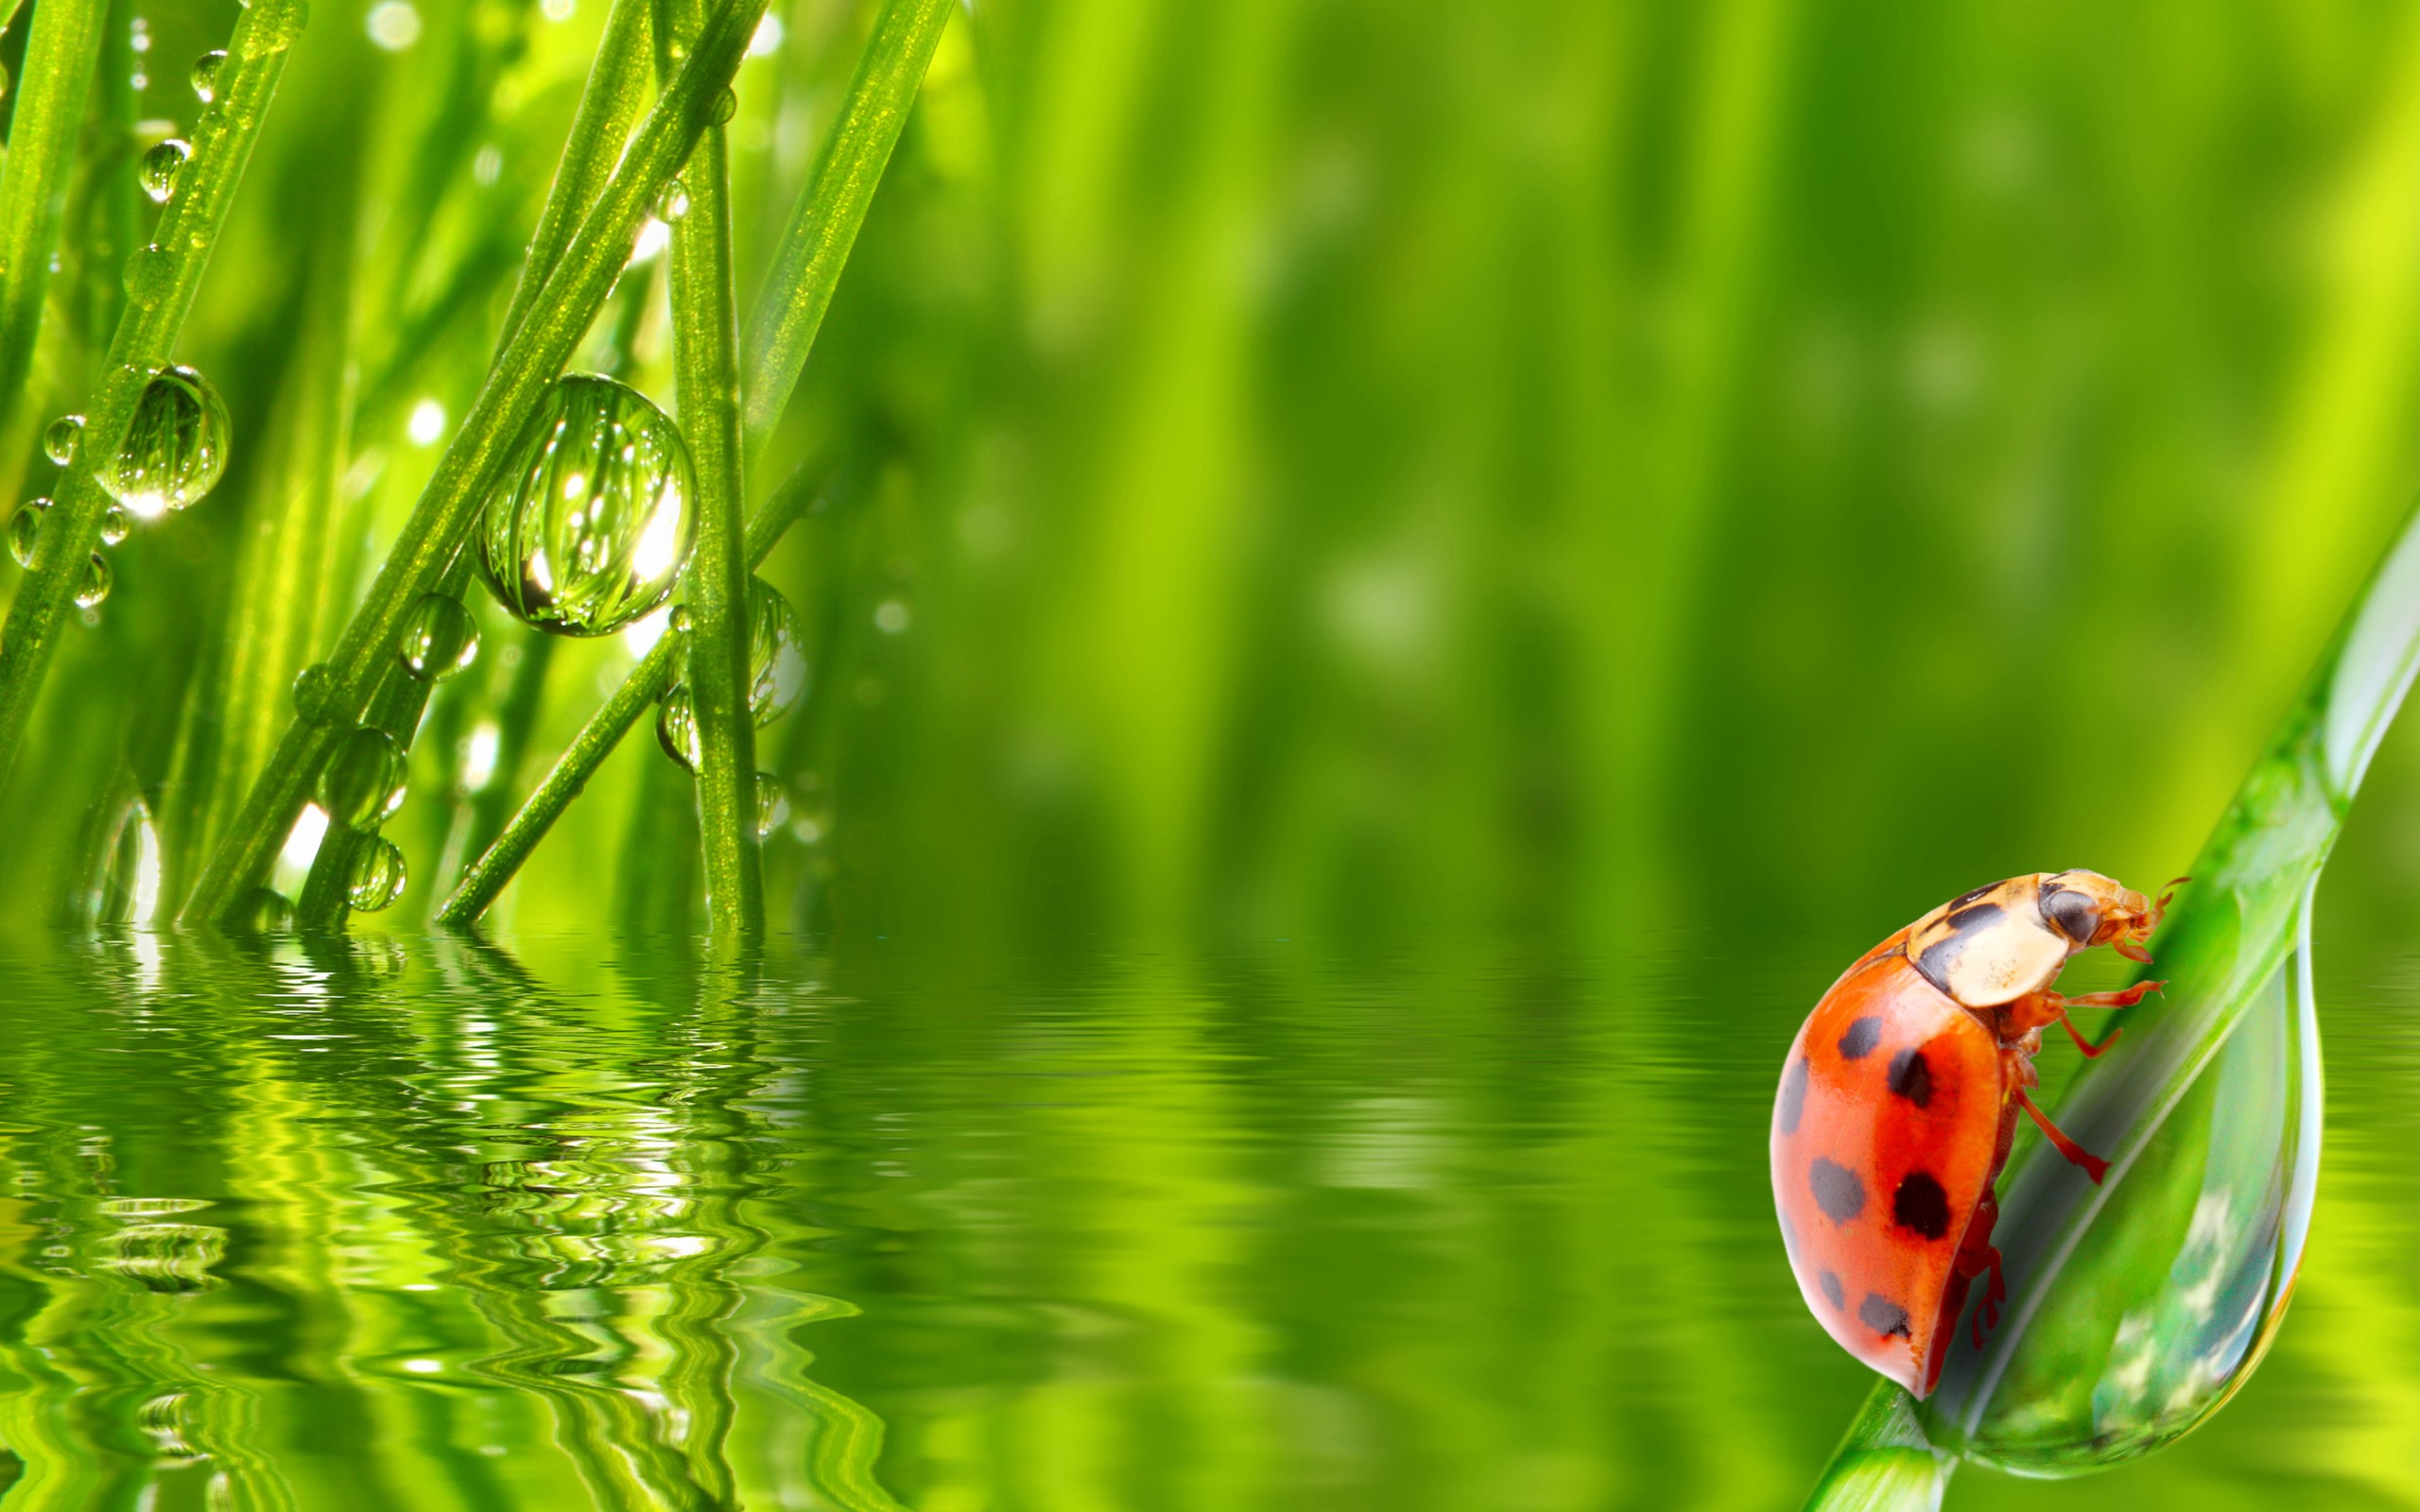 ladybug, Insect, Grass, Water, Dew, Morning, Drop Wallpaper